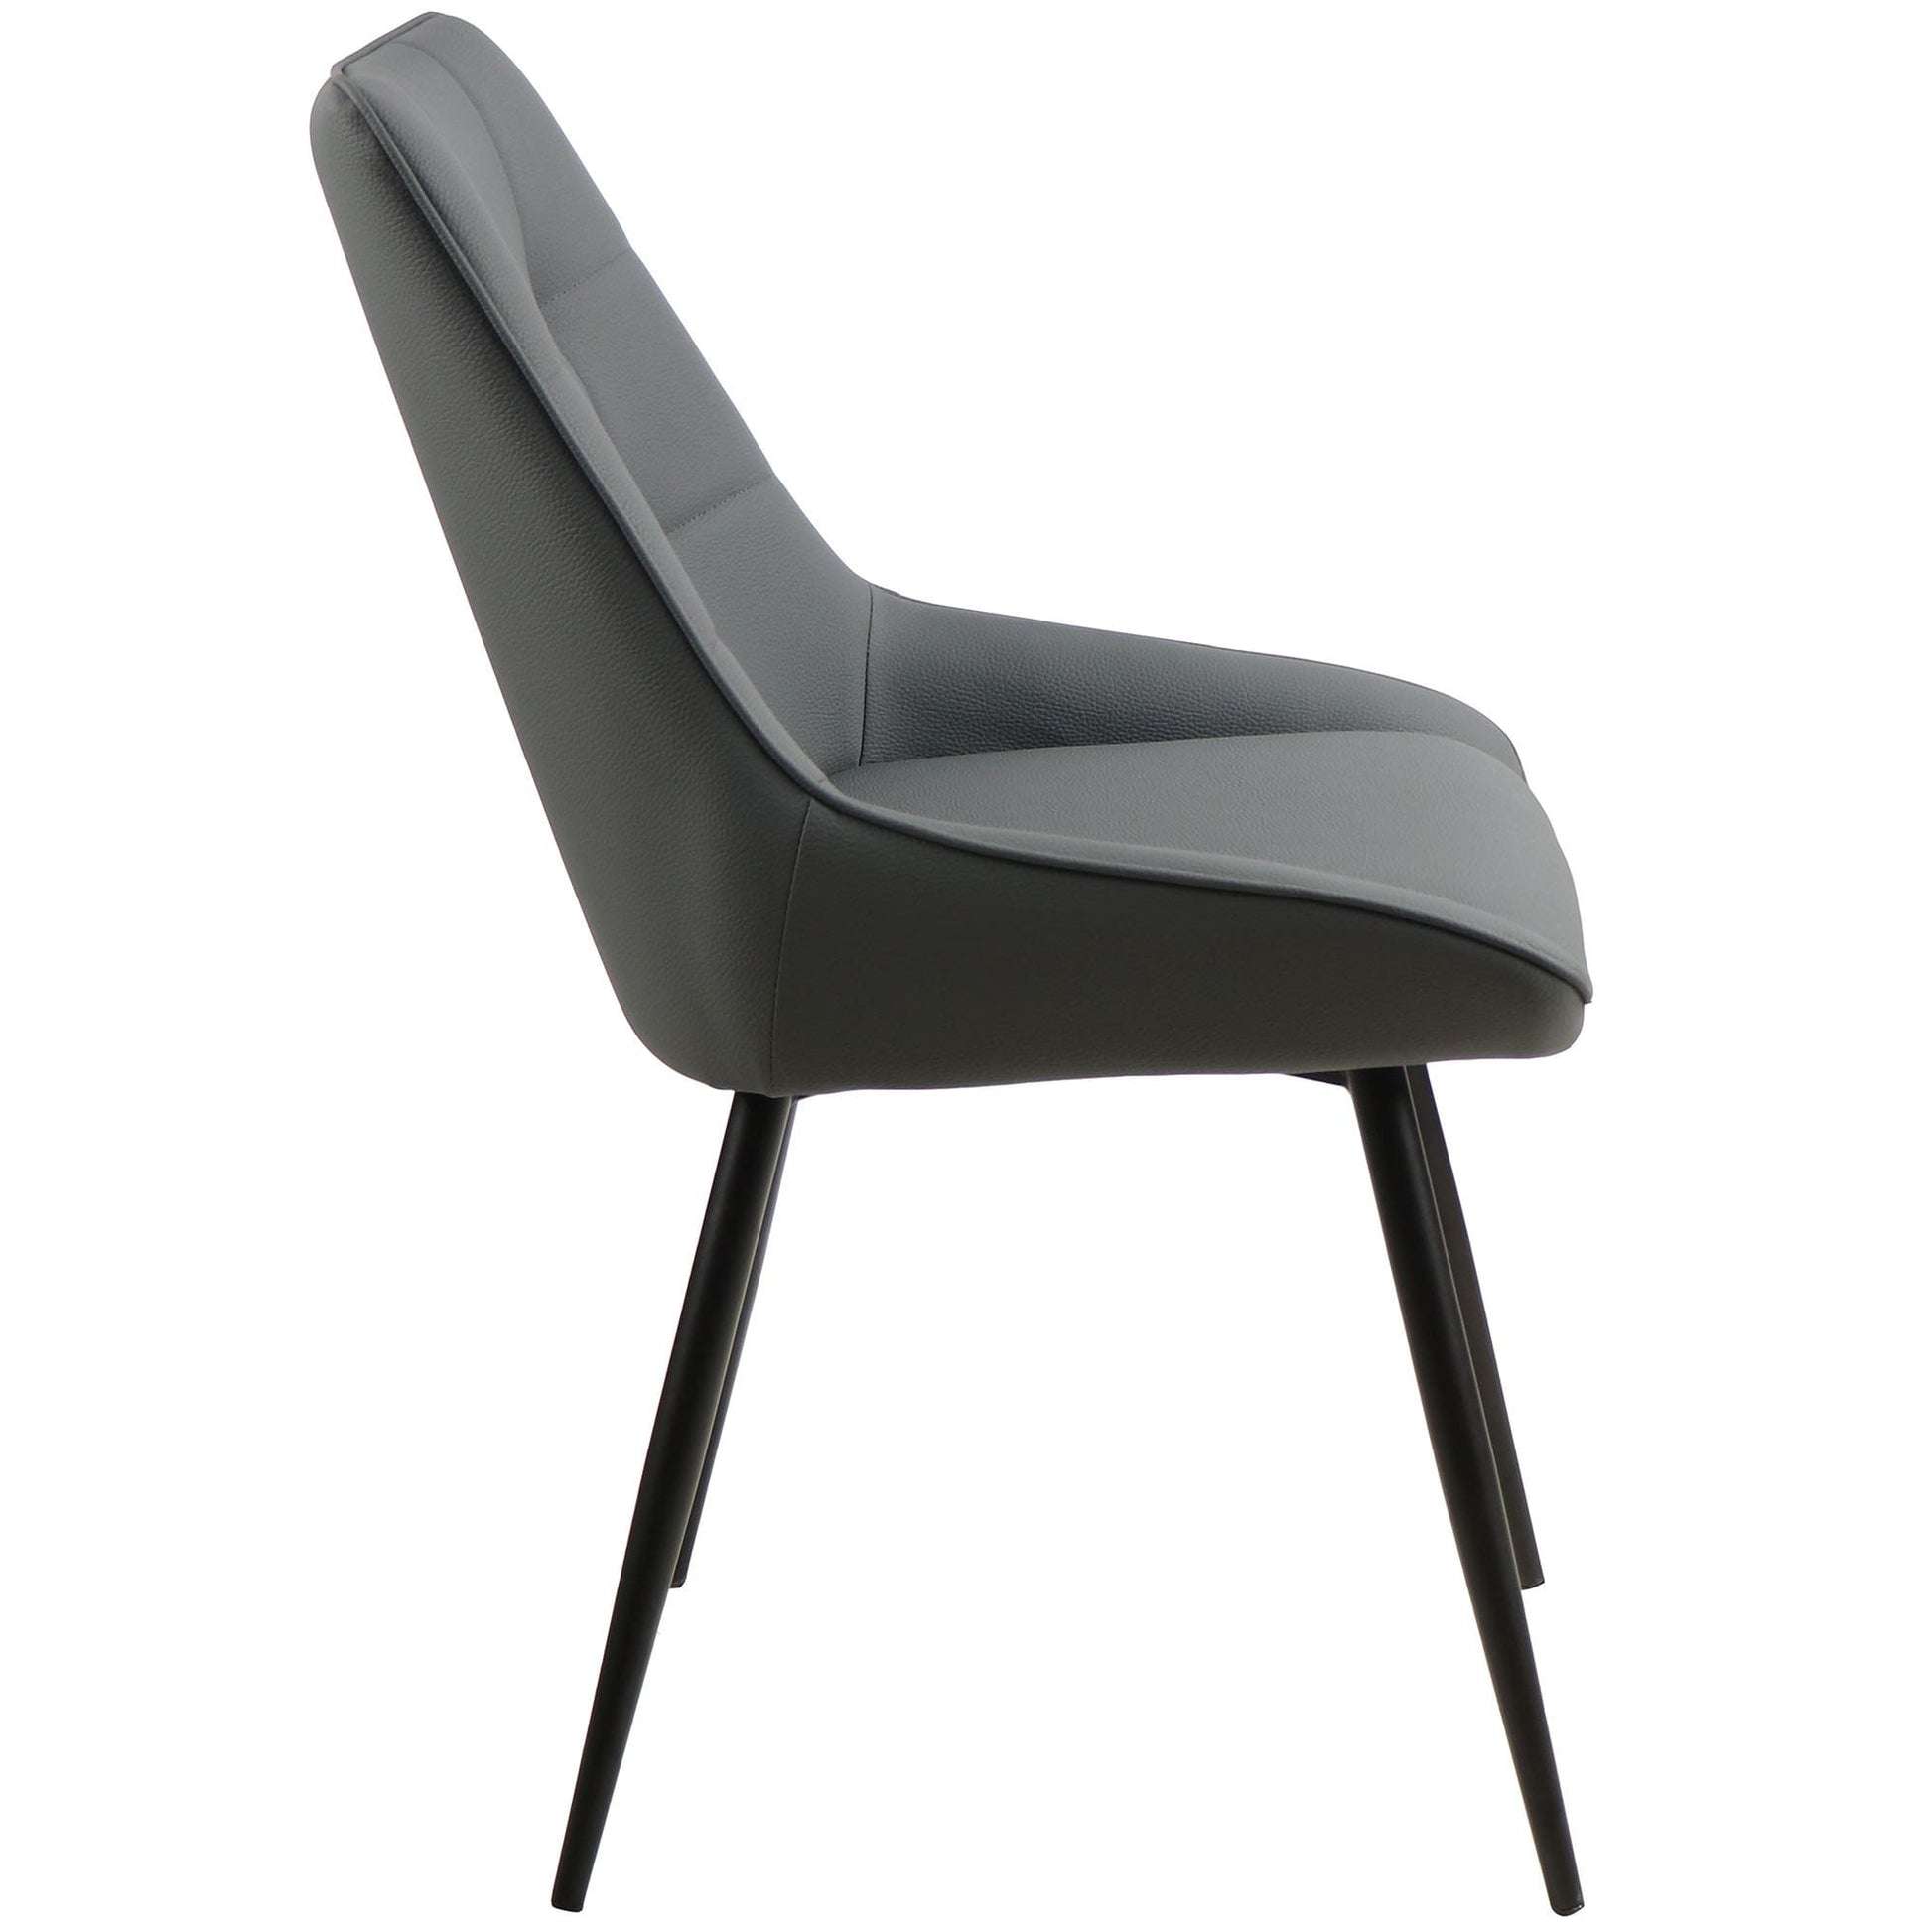 Lyon | Modern PU Leather Dining Chairs Set Of 2 | Charcoal